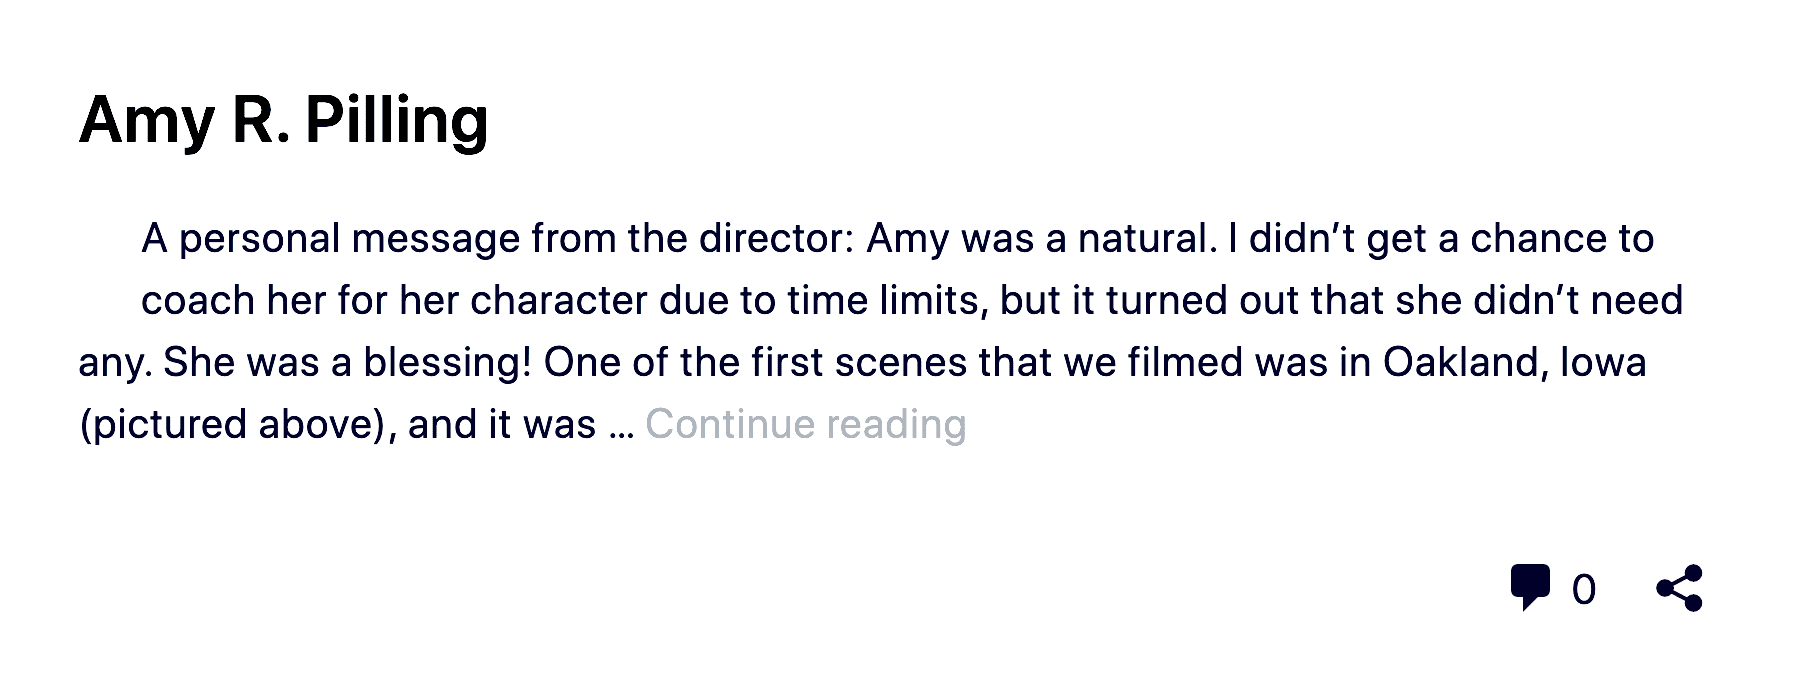 "Apparition" Movie Actress, Executive and Co-Producer, Amy R. Pilling